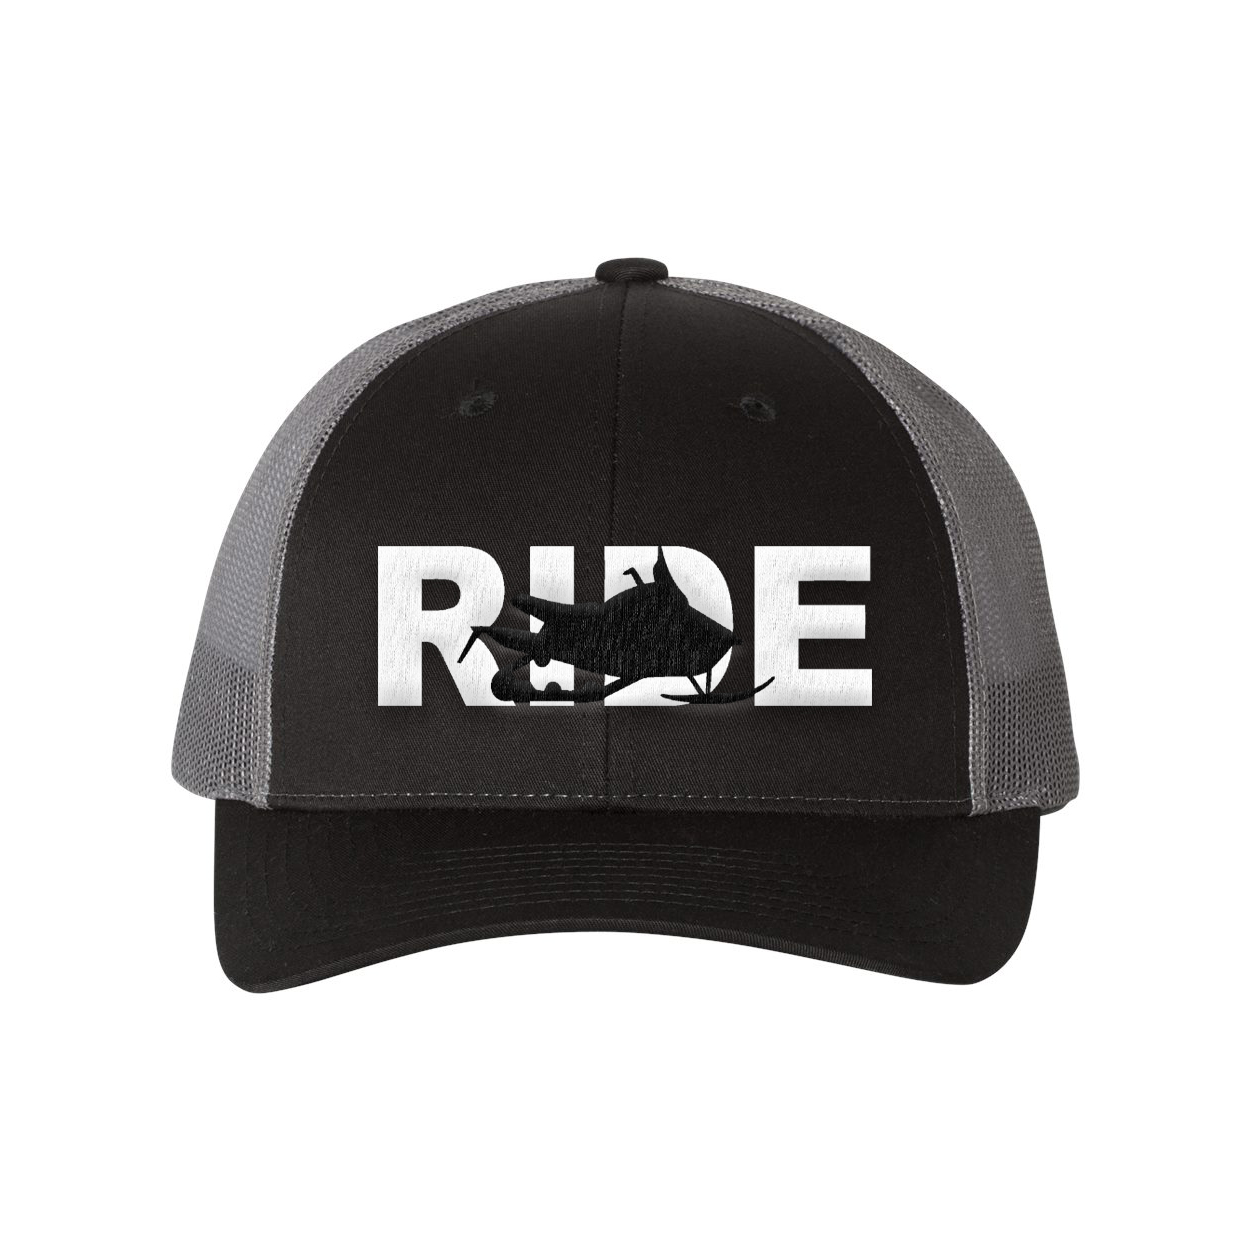 Ride Snowmobile Logo Classic Pro 3D Puff Embroidered Snapback Trucker Hat Black/Gray